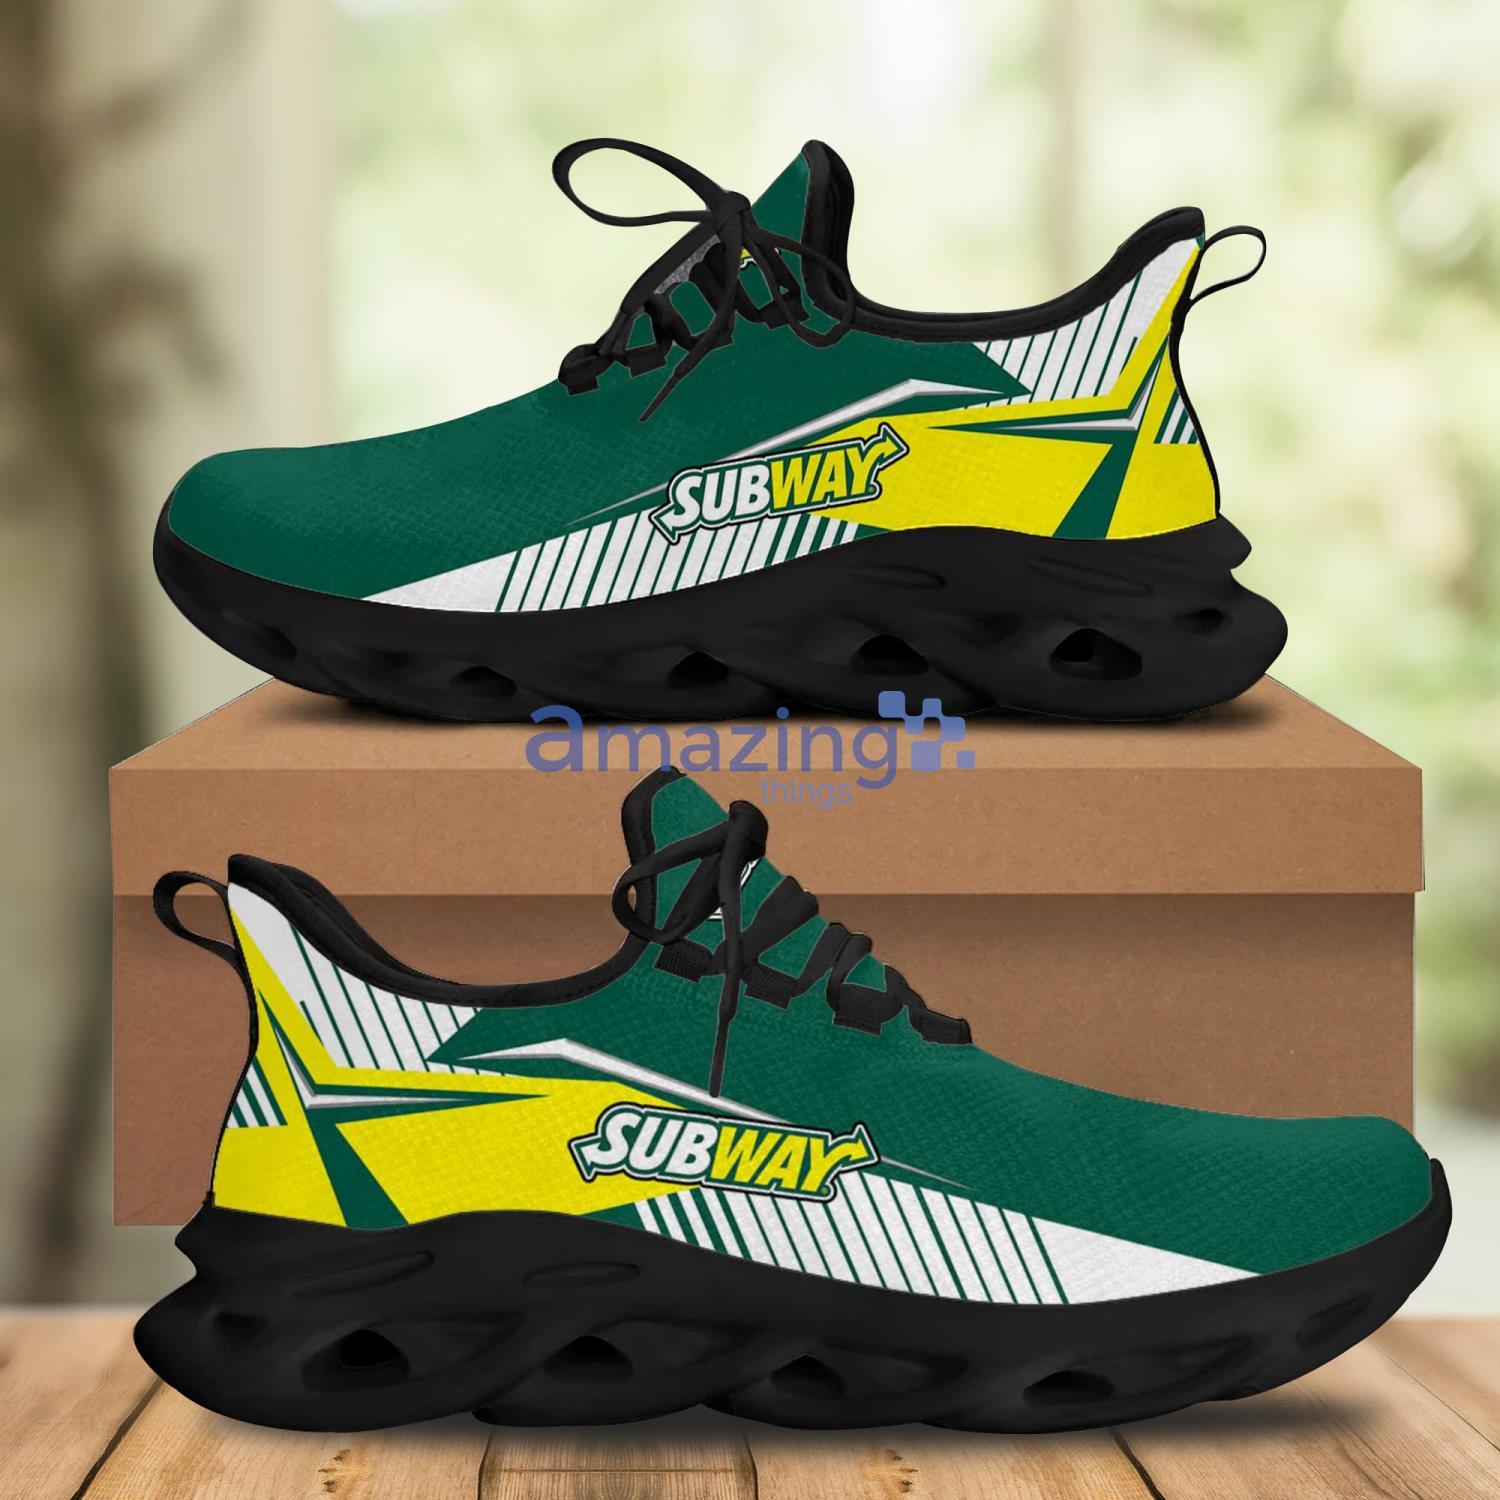 Subway Chunky Sneakers Max Soul Shoes For Men And Women